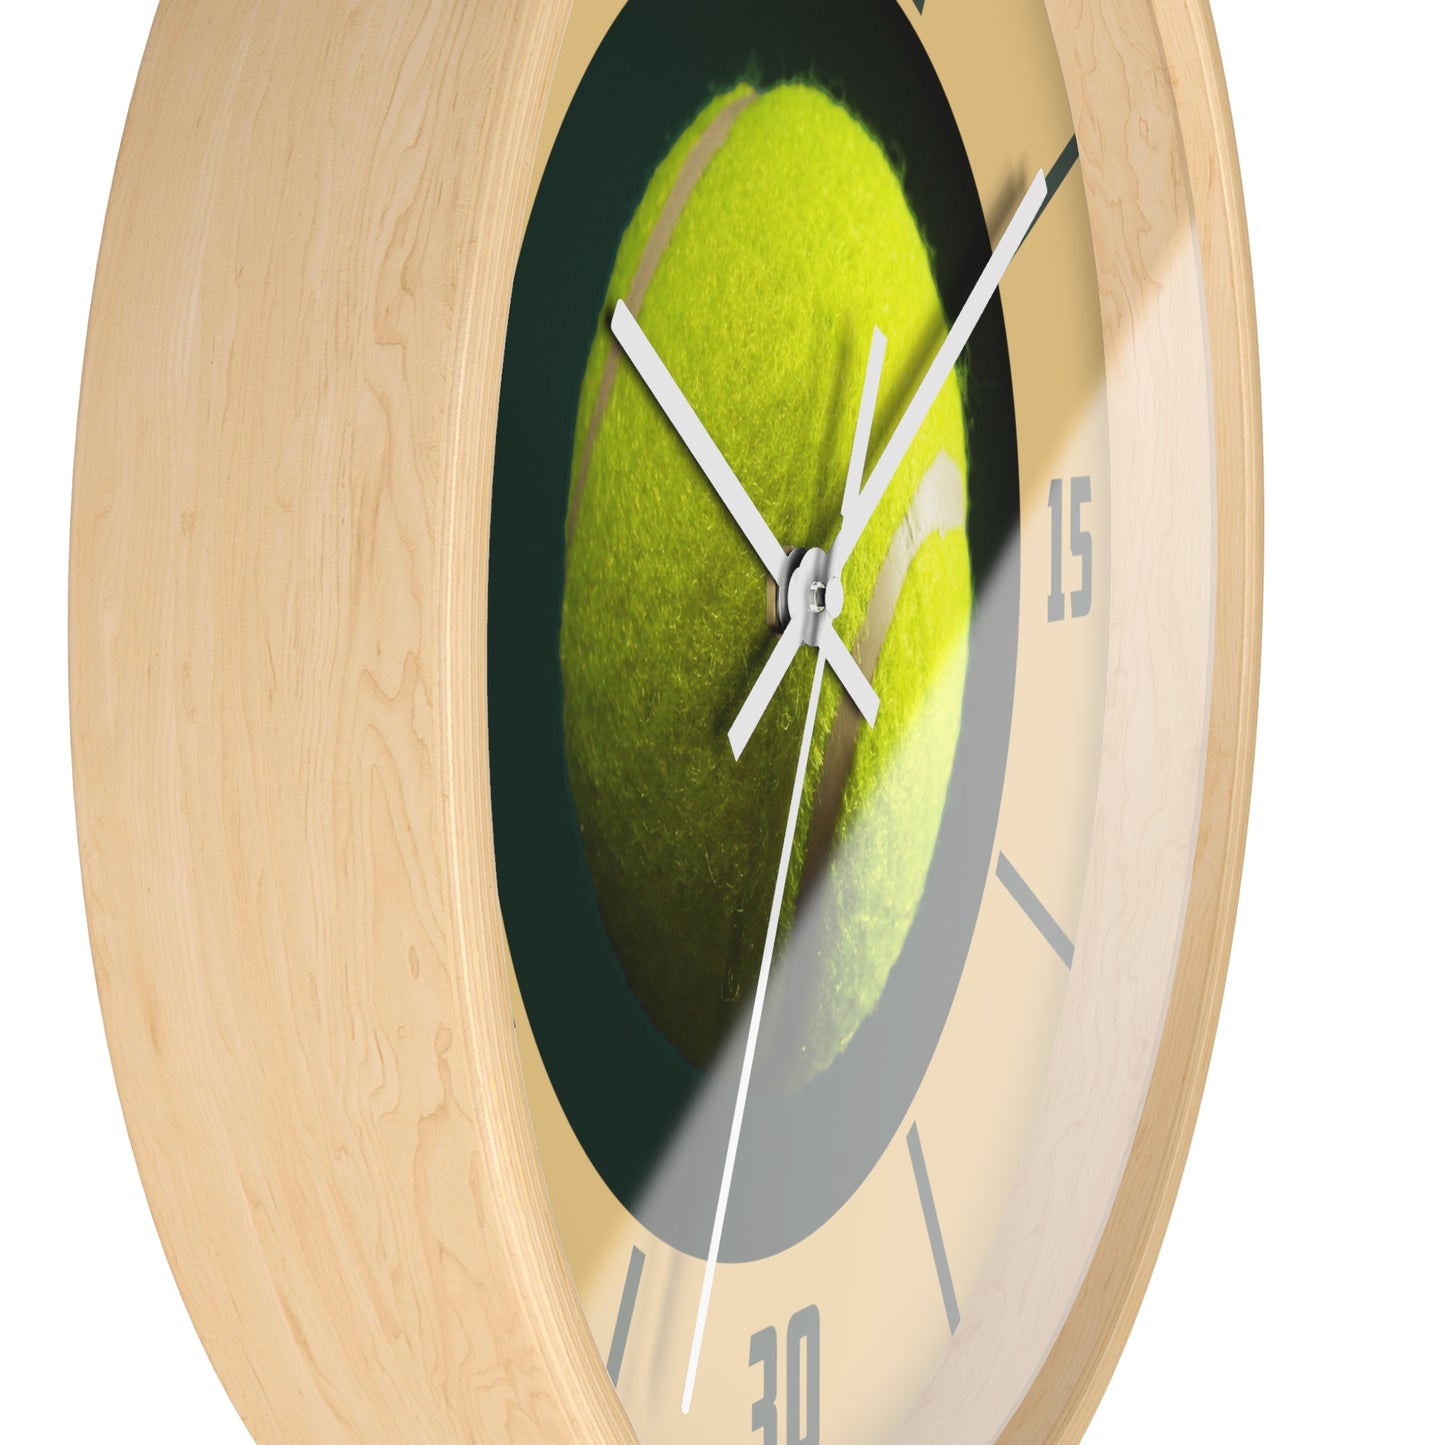 TENNIS CLOCK - 10" Wall Clock, with Tennis Ball, funny gift for Tennis Player, Tennis Club Decor, 2" light wooden frame and plexiglass front